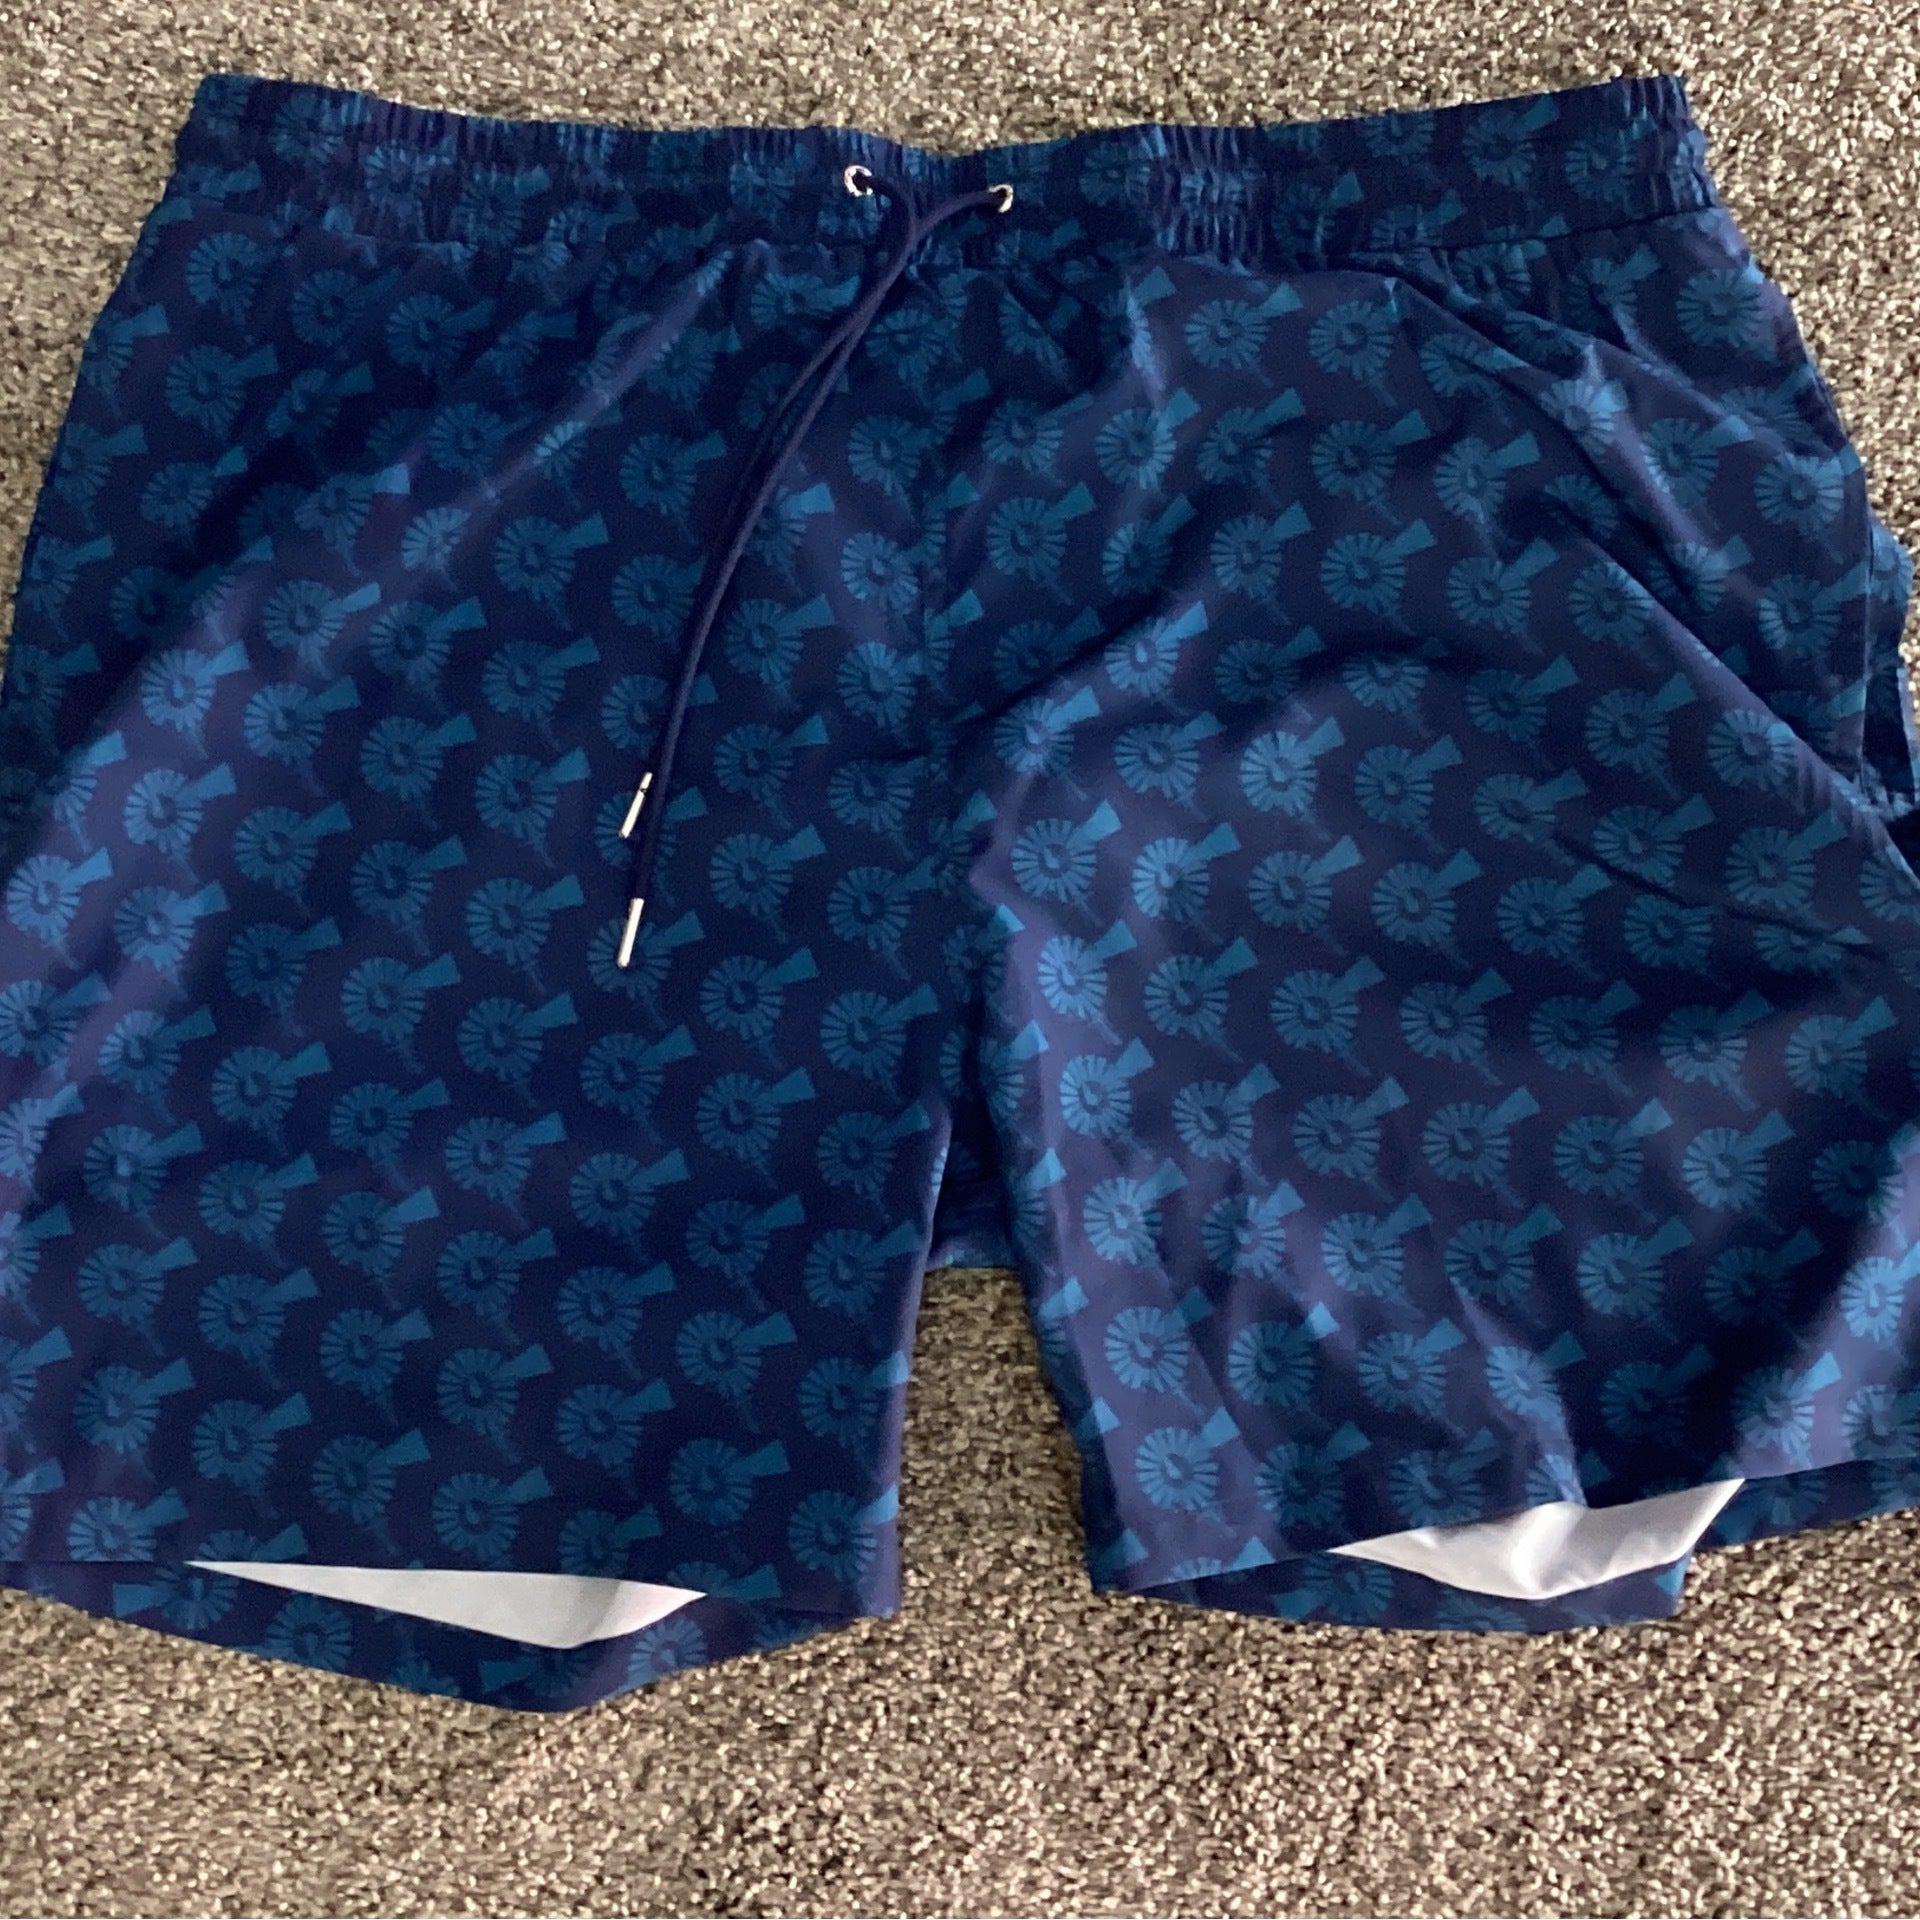 Classic Old South Mens Swim Trunks  Gunpowder And Lead Clothing Boutique  LLC